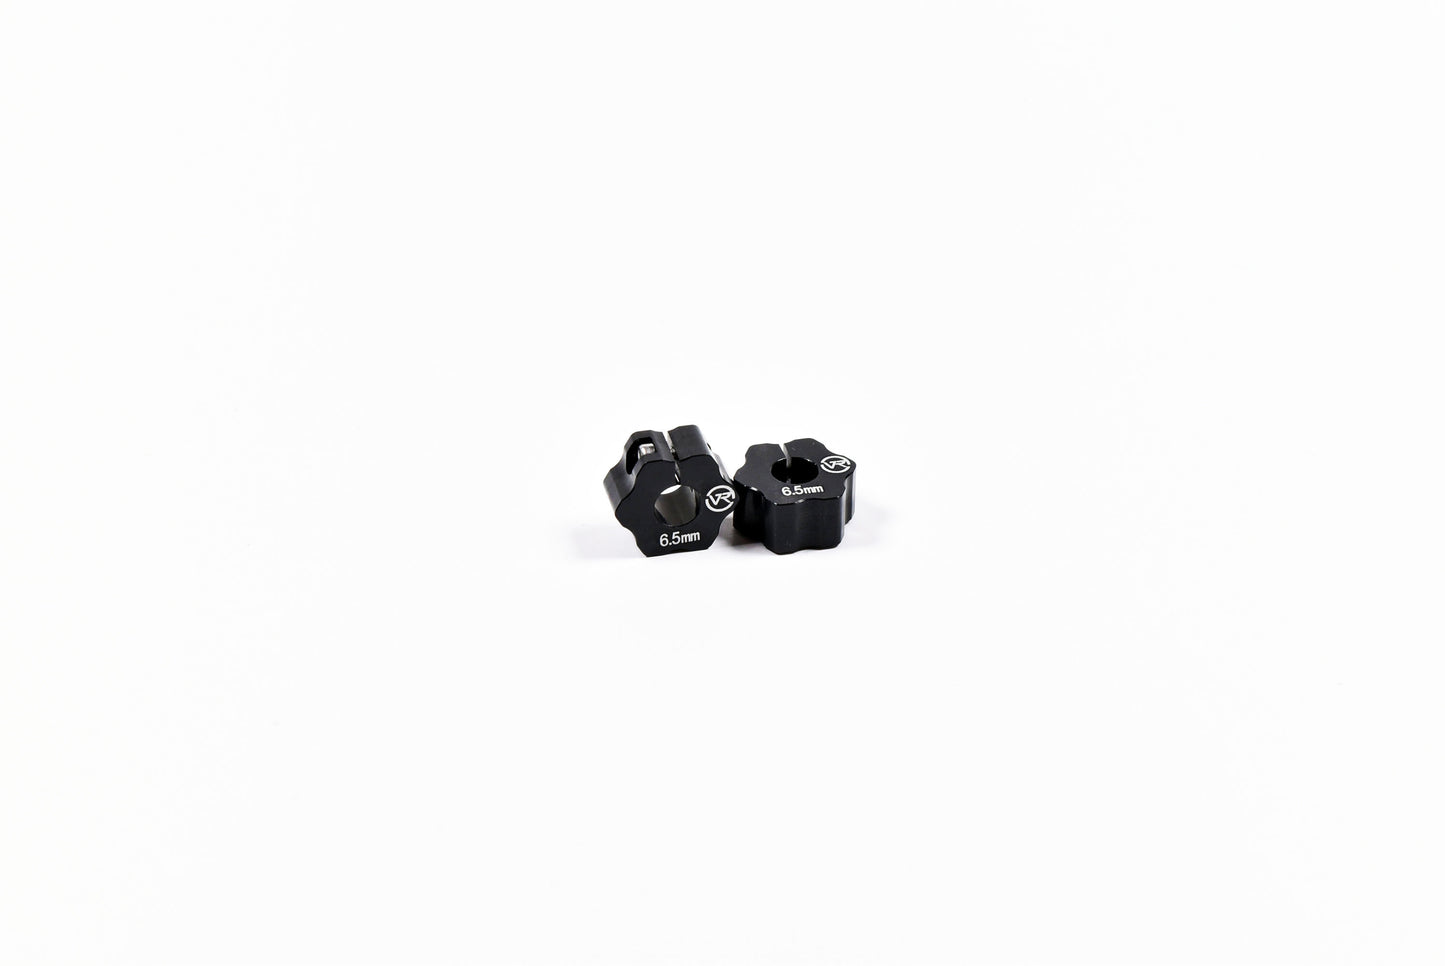 Vision Racing 6.5mm LW Clamping Hex